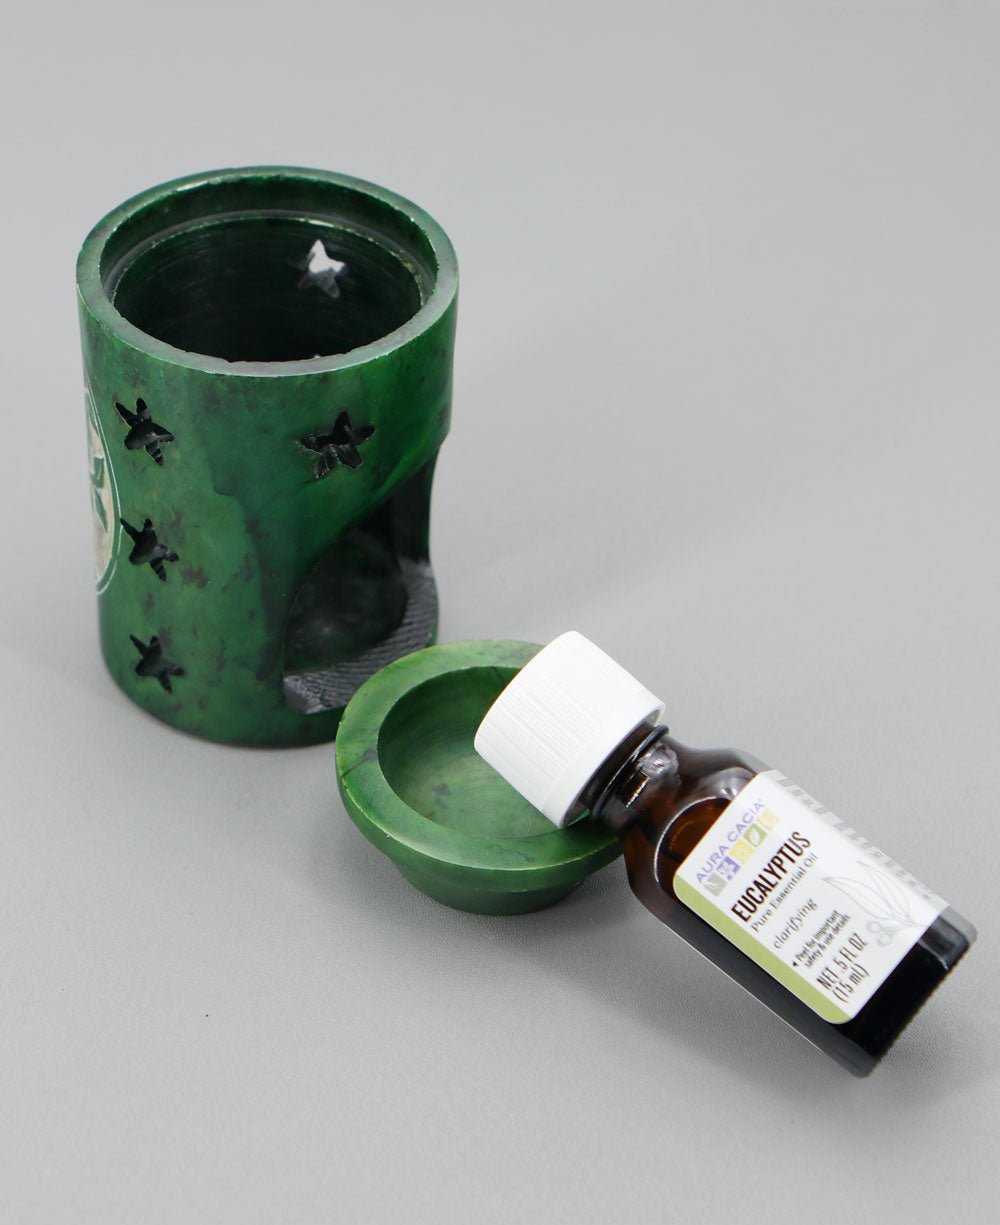 Green Tree Of Life Oil Burner With Eucalyptus Essential Oil - Candle & Oil Warmers